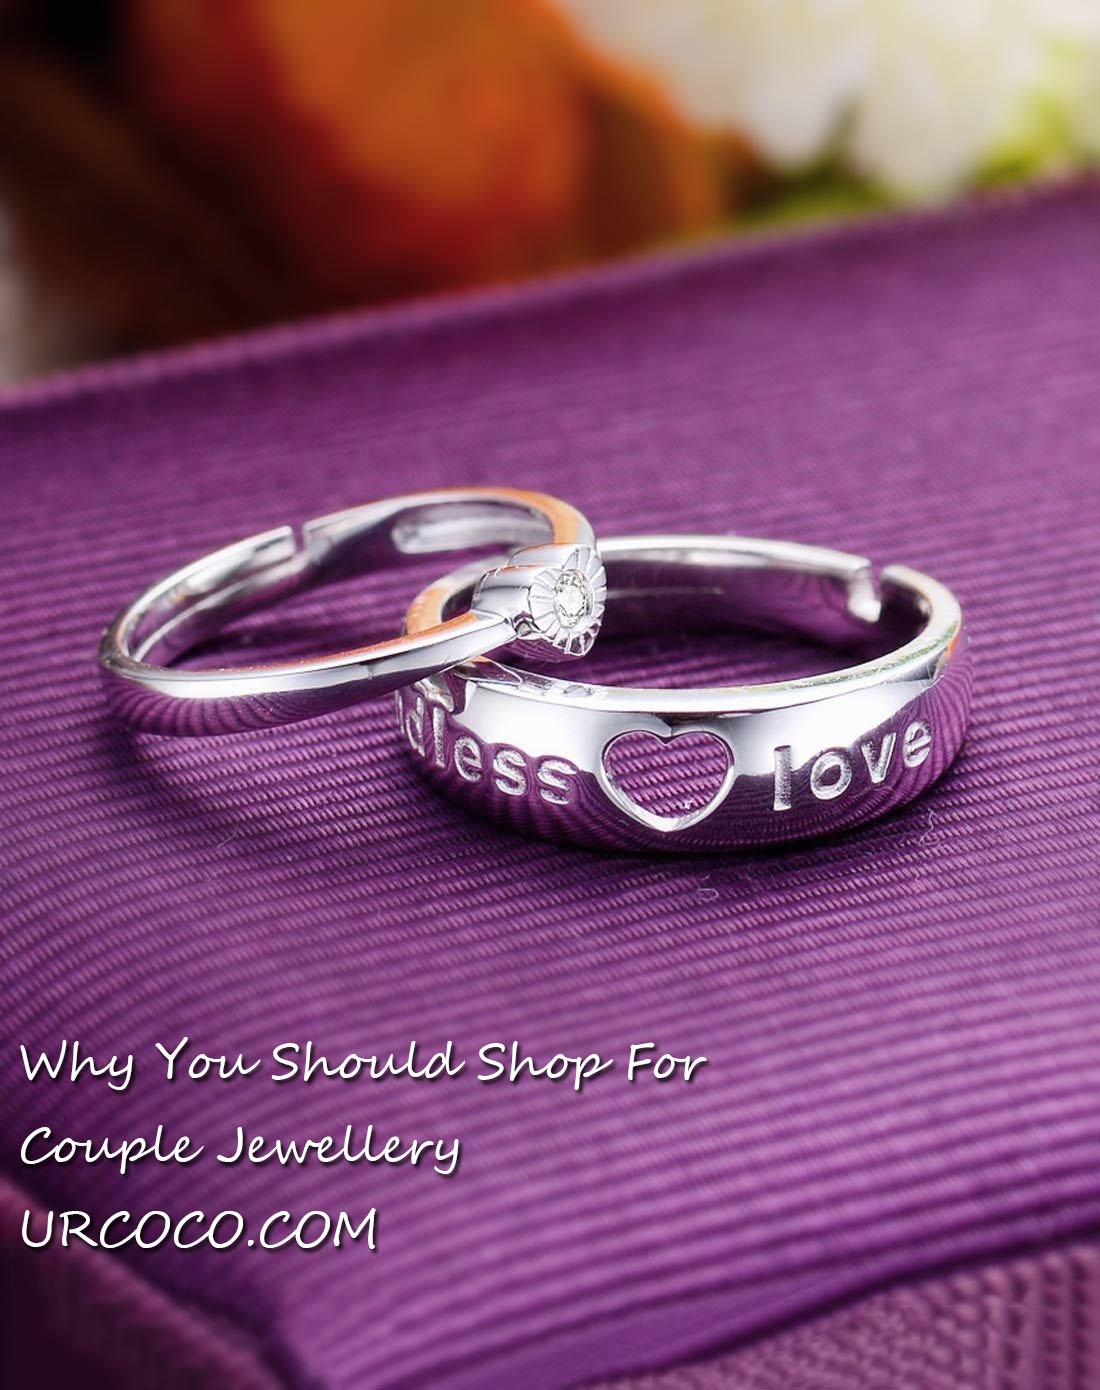 Why You Should Shop For Couple Jewellery